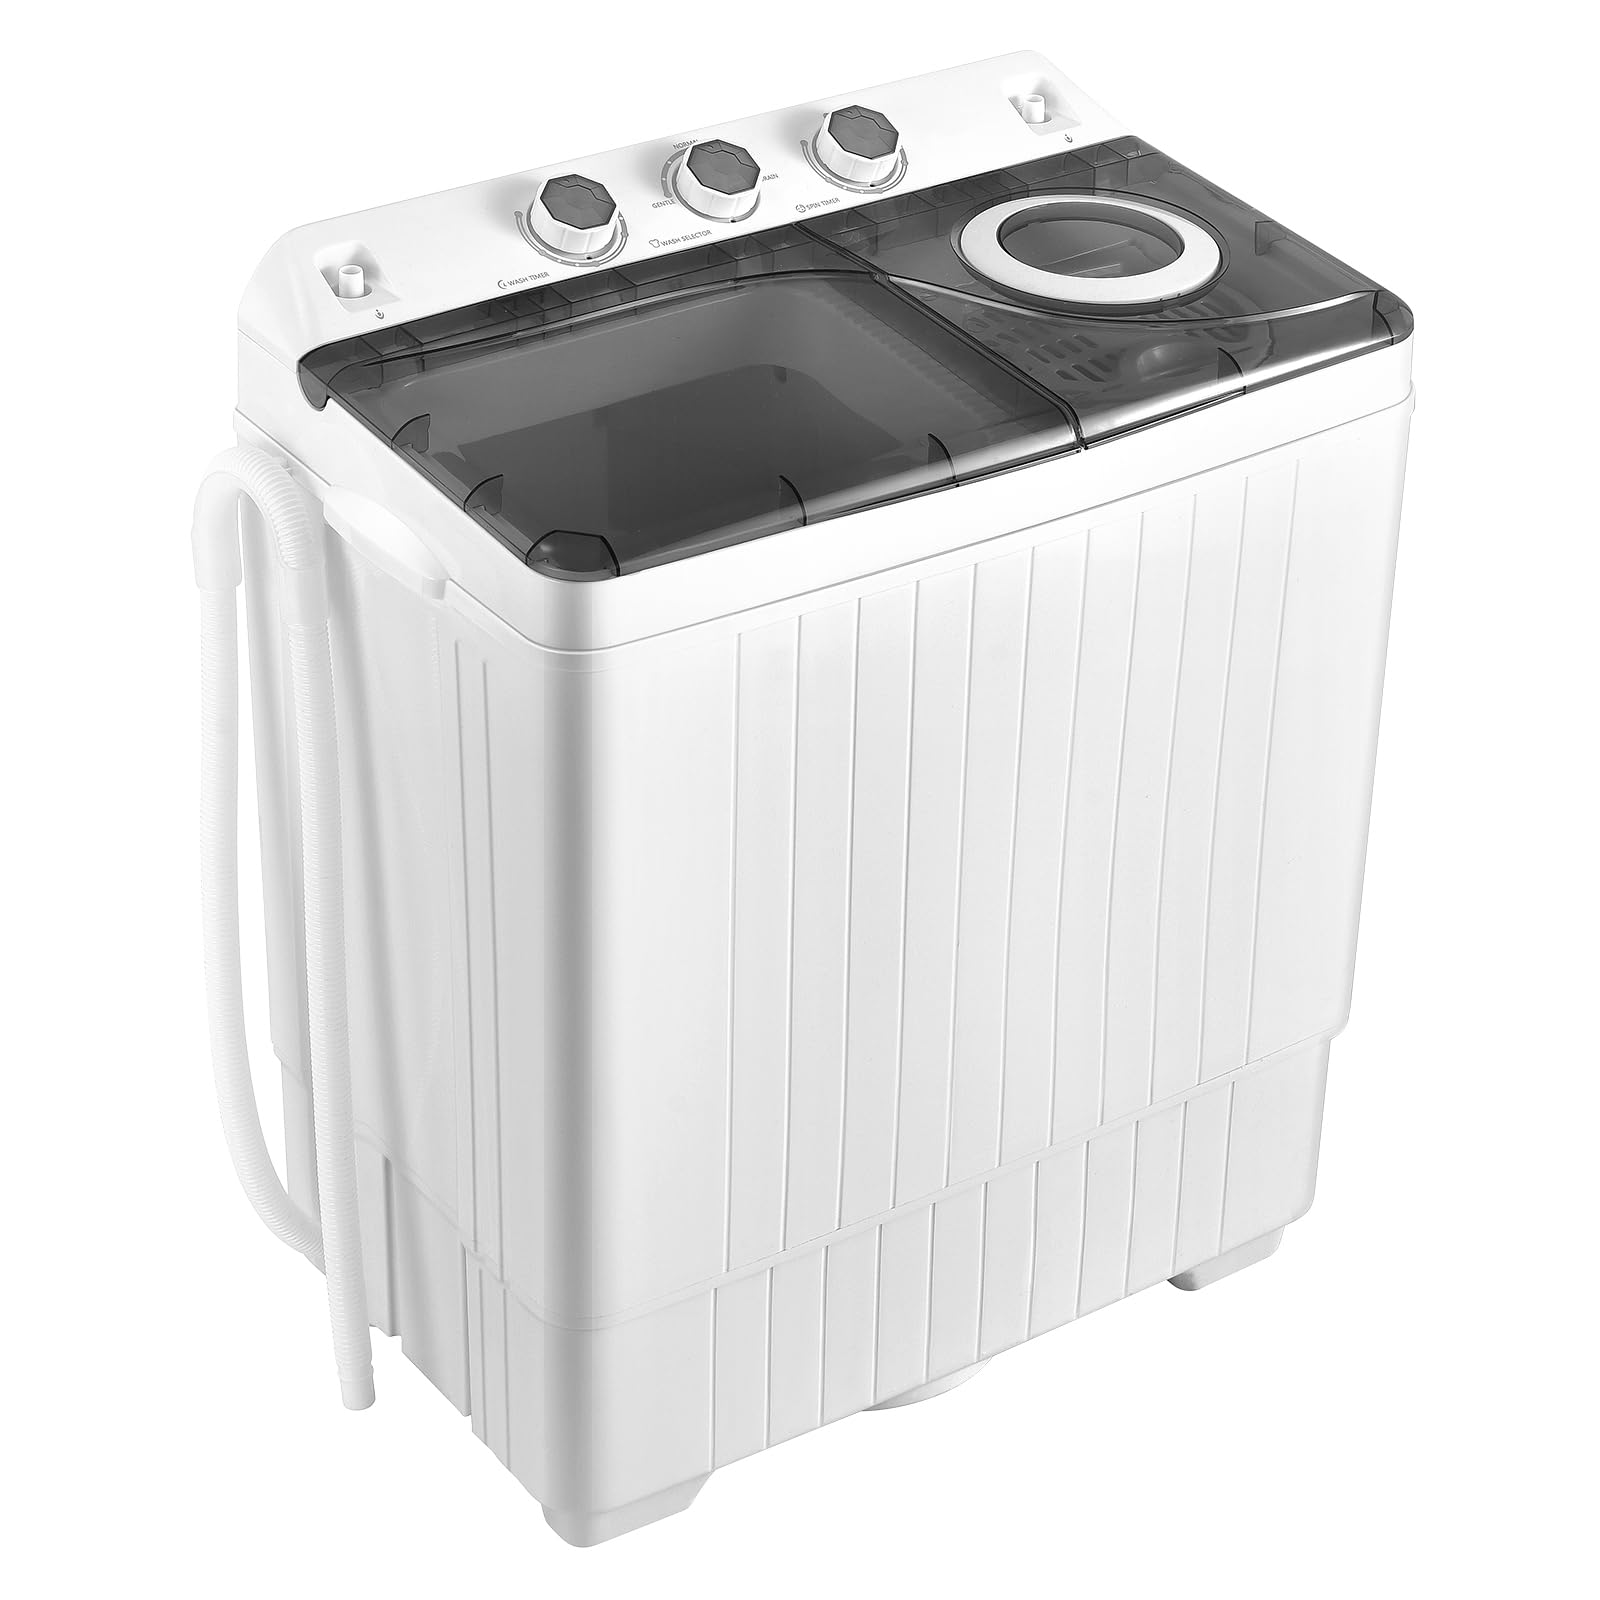 Giantex Portable Washing Machine, 26lbs Washer and Spinner Combo,18 lbs Washing 8 lbs Spinning